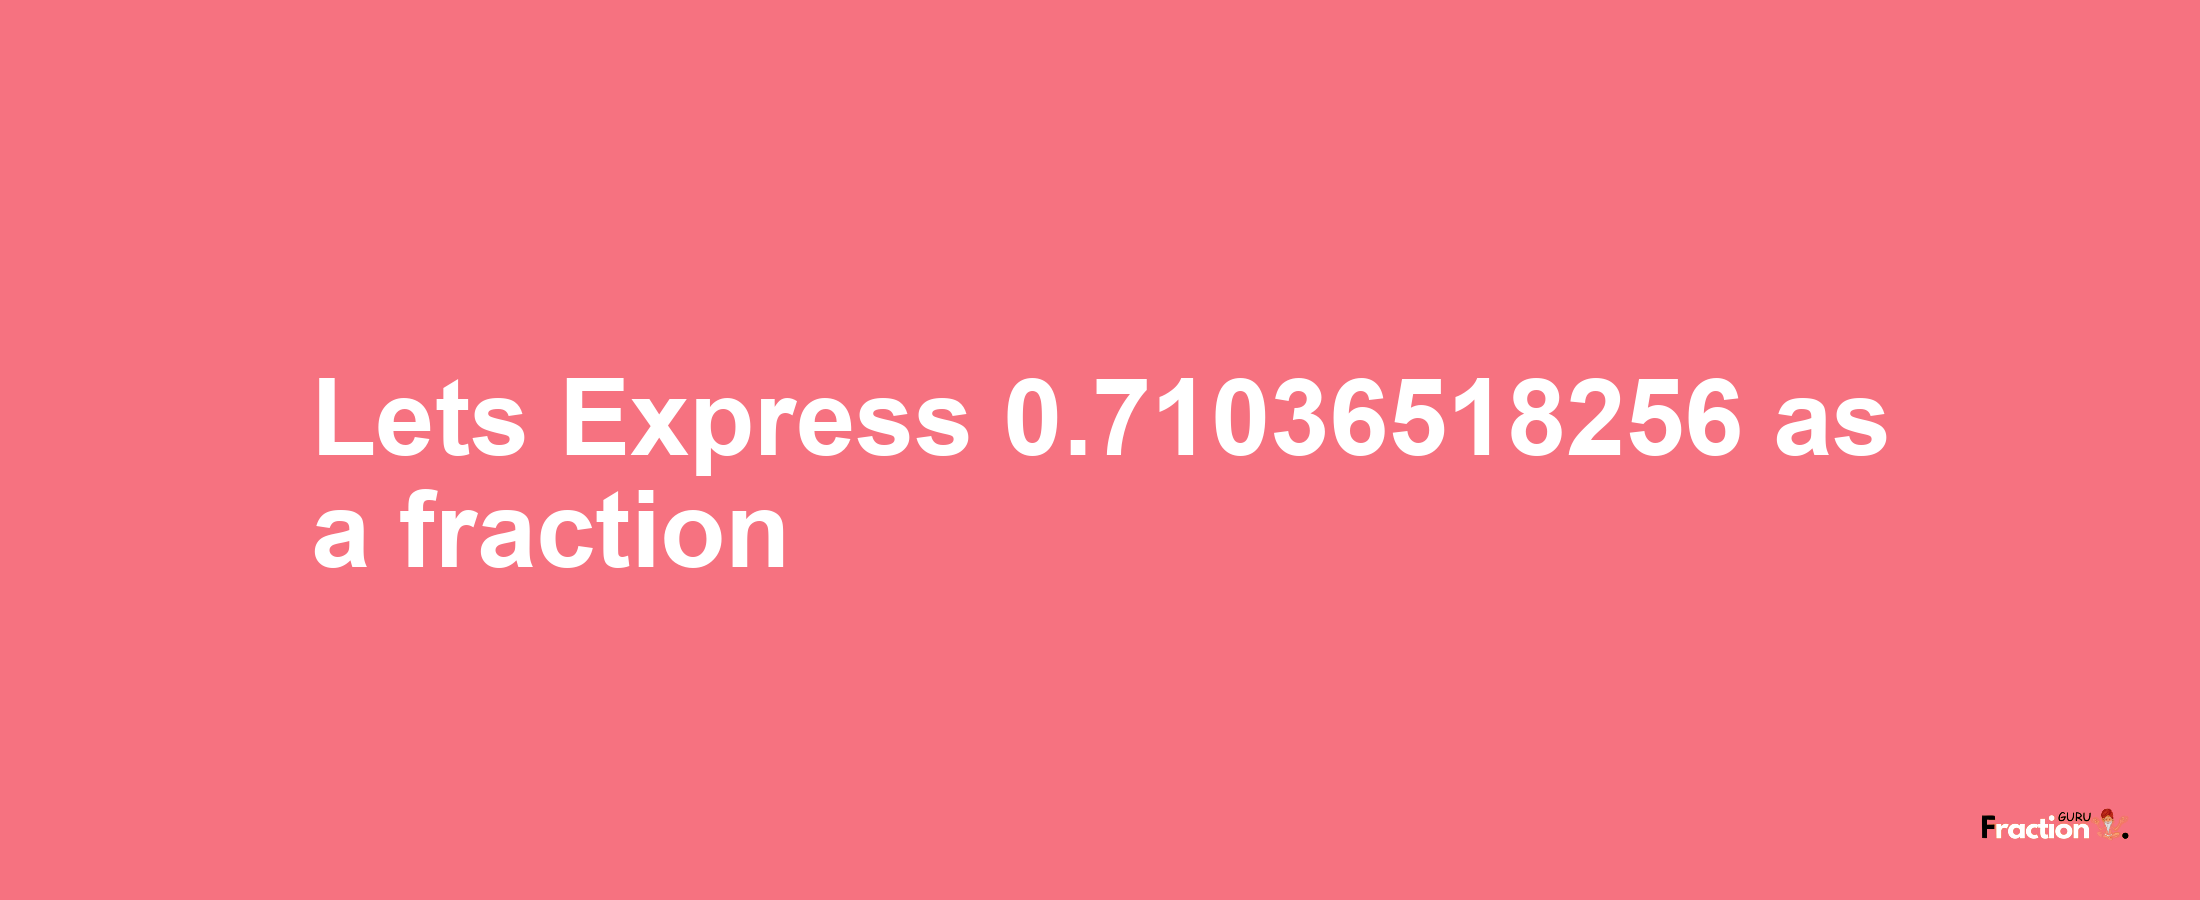 Lets Express 0.71036518256 as afraction